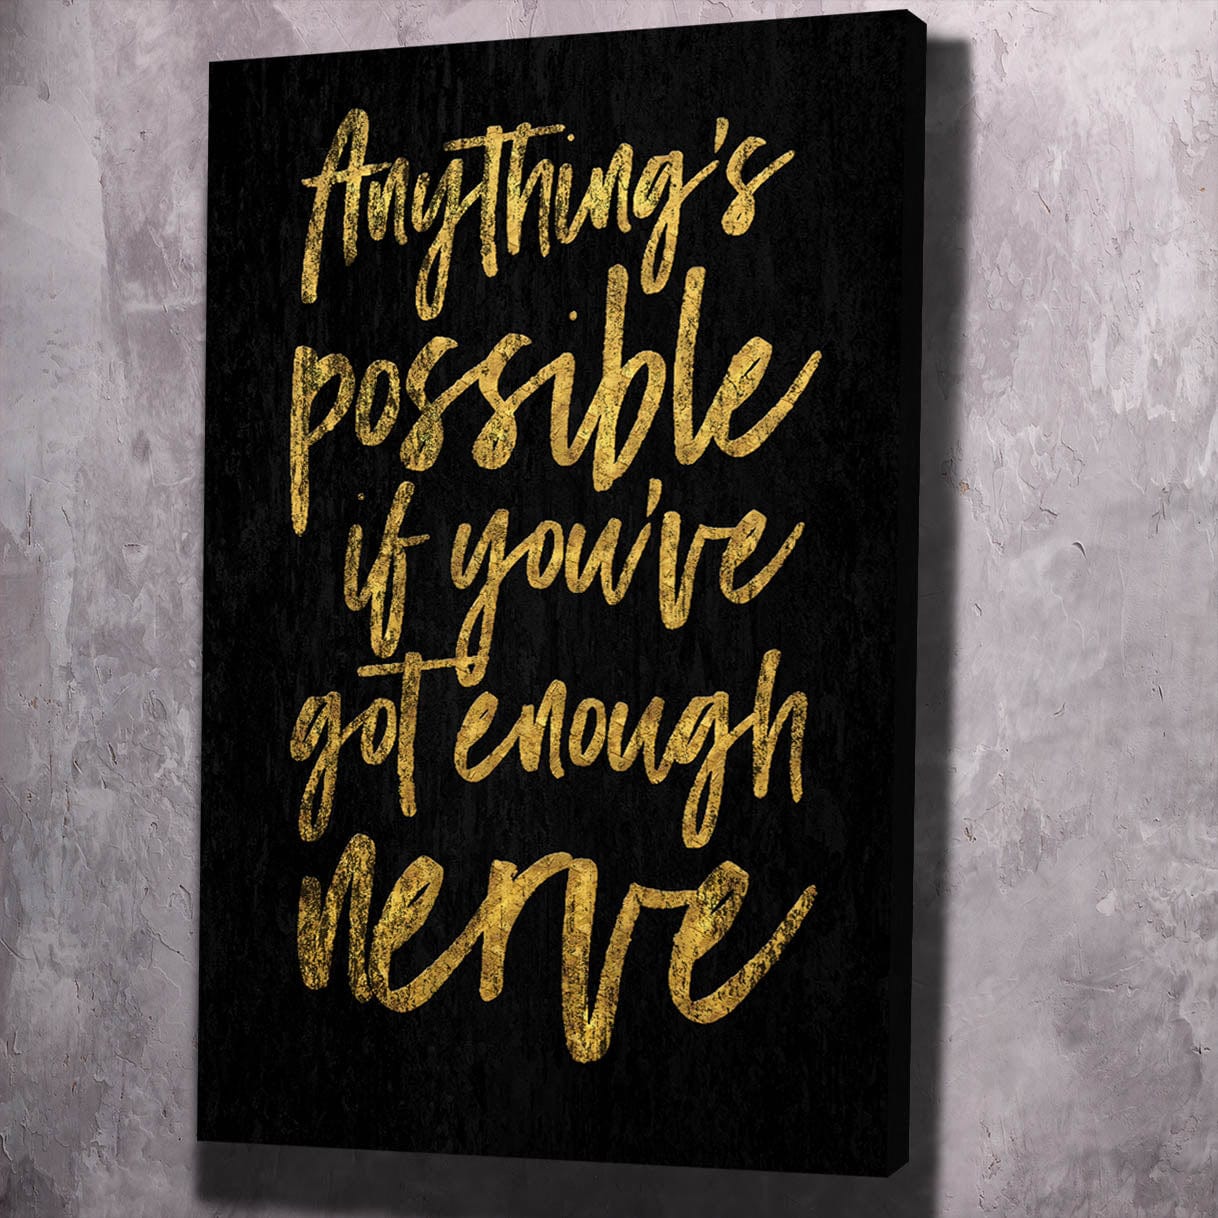 Anything Is Possible Wall Art | Inspirational Wall Art Motivational Wall Art Quotes Office Art | ImpaktMaker Exclusive Canvas Art Portrait